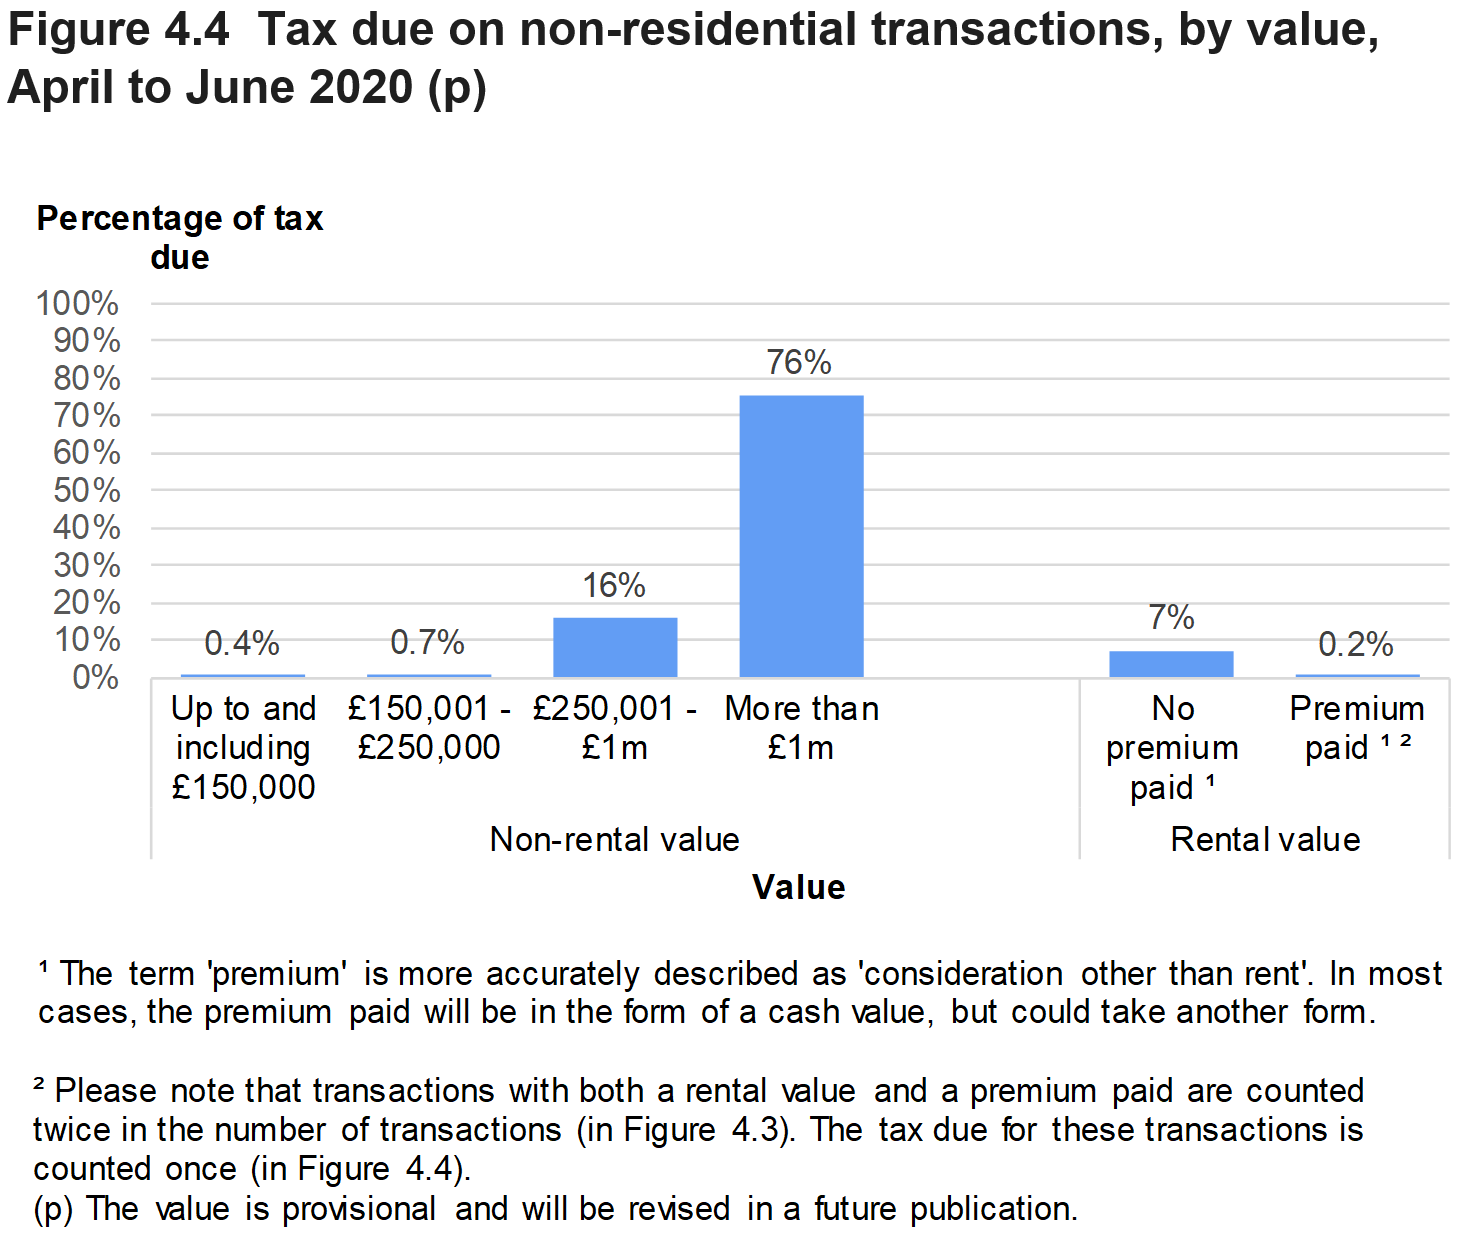 Figure 4.4 shows the amount of tax due on non-residential transactions, by value of the property. Data is presented as the percentage of transactions and relates to transactions effective in April to June 2020.